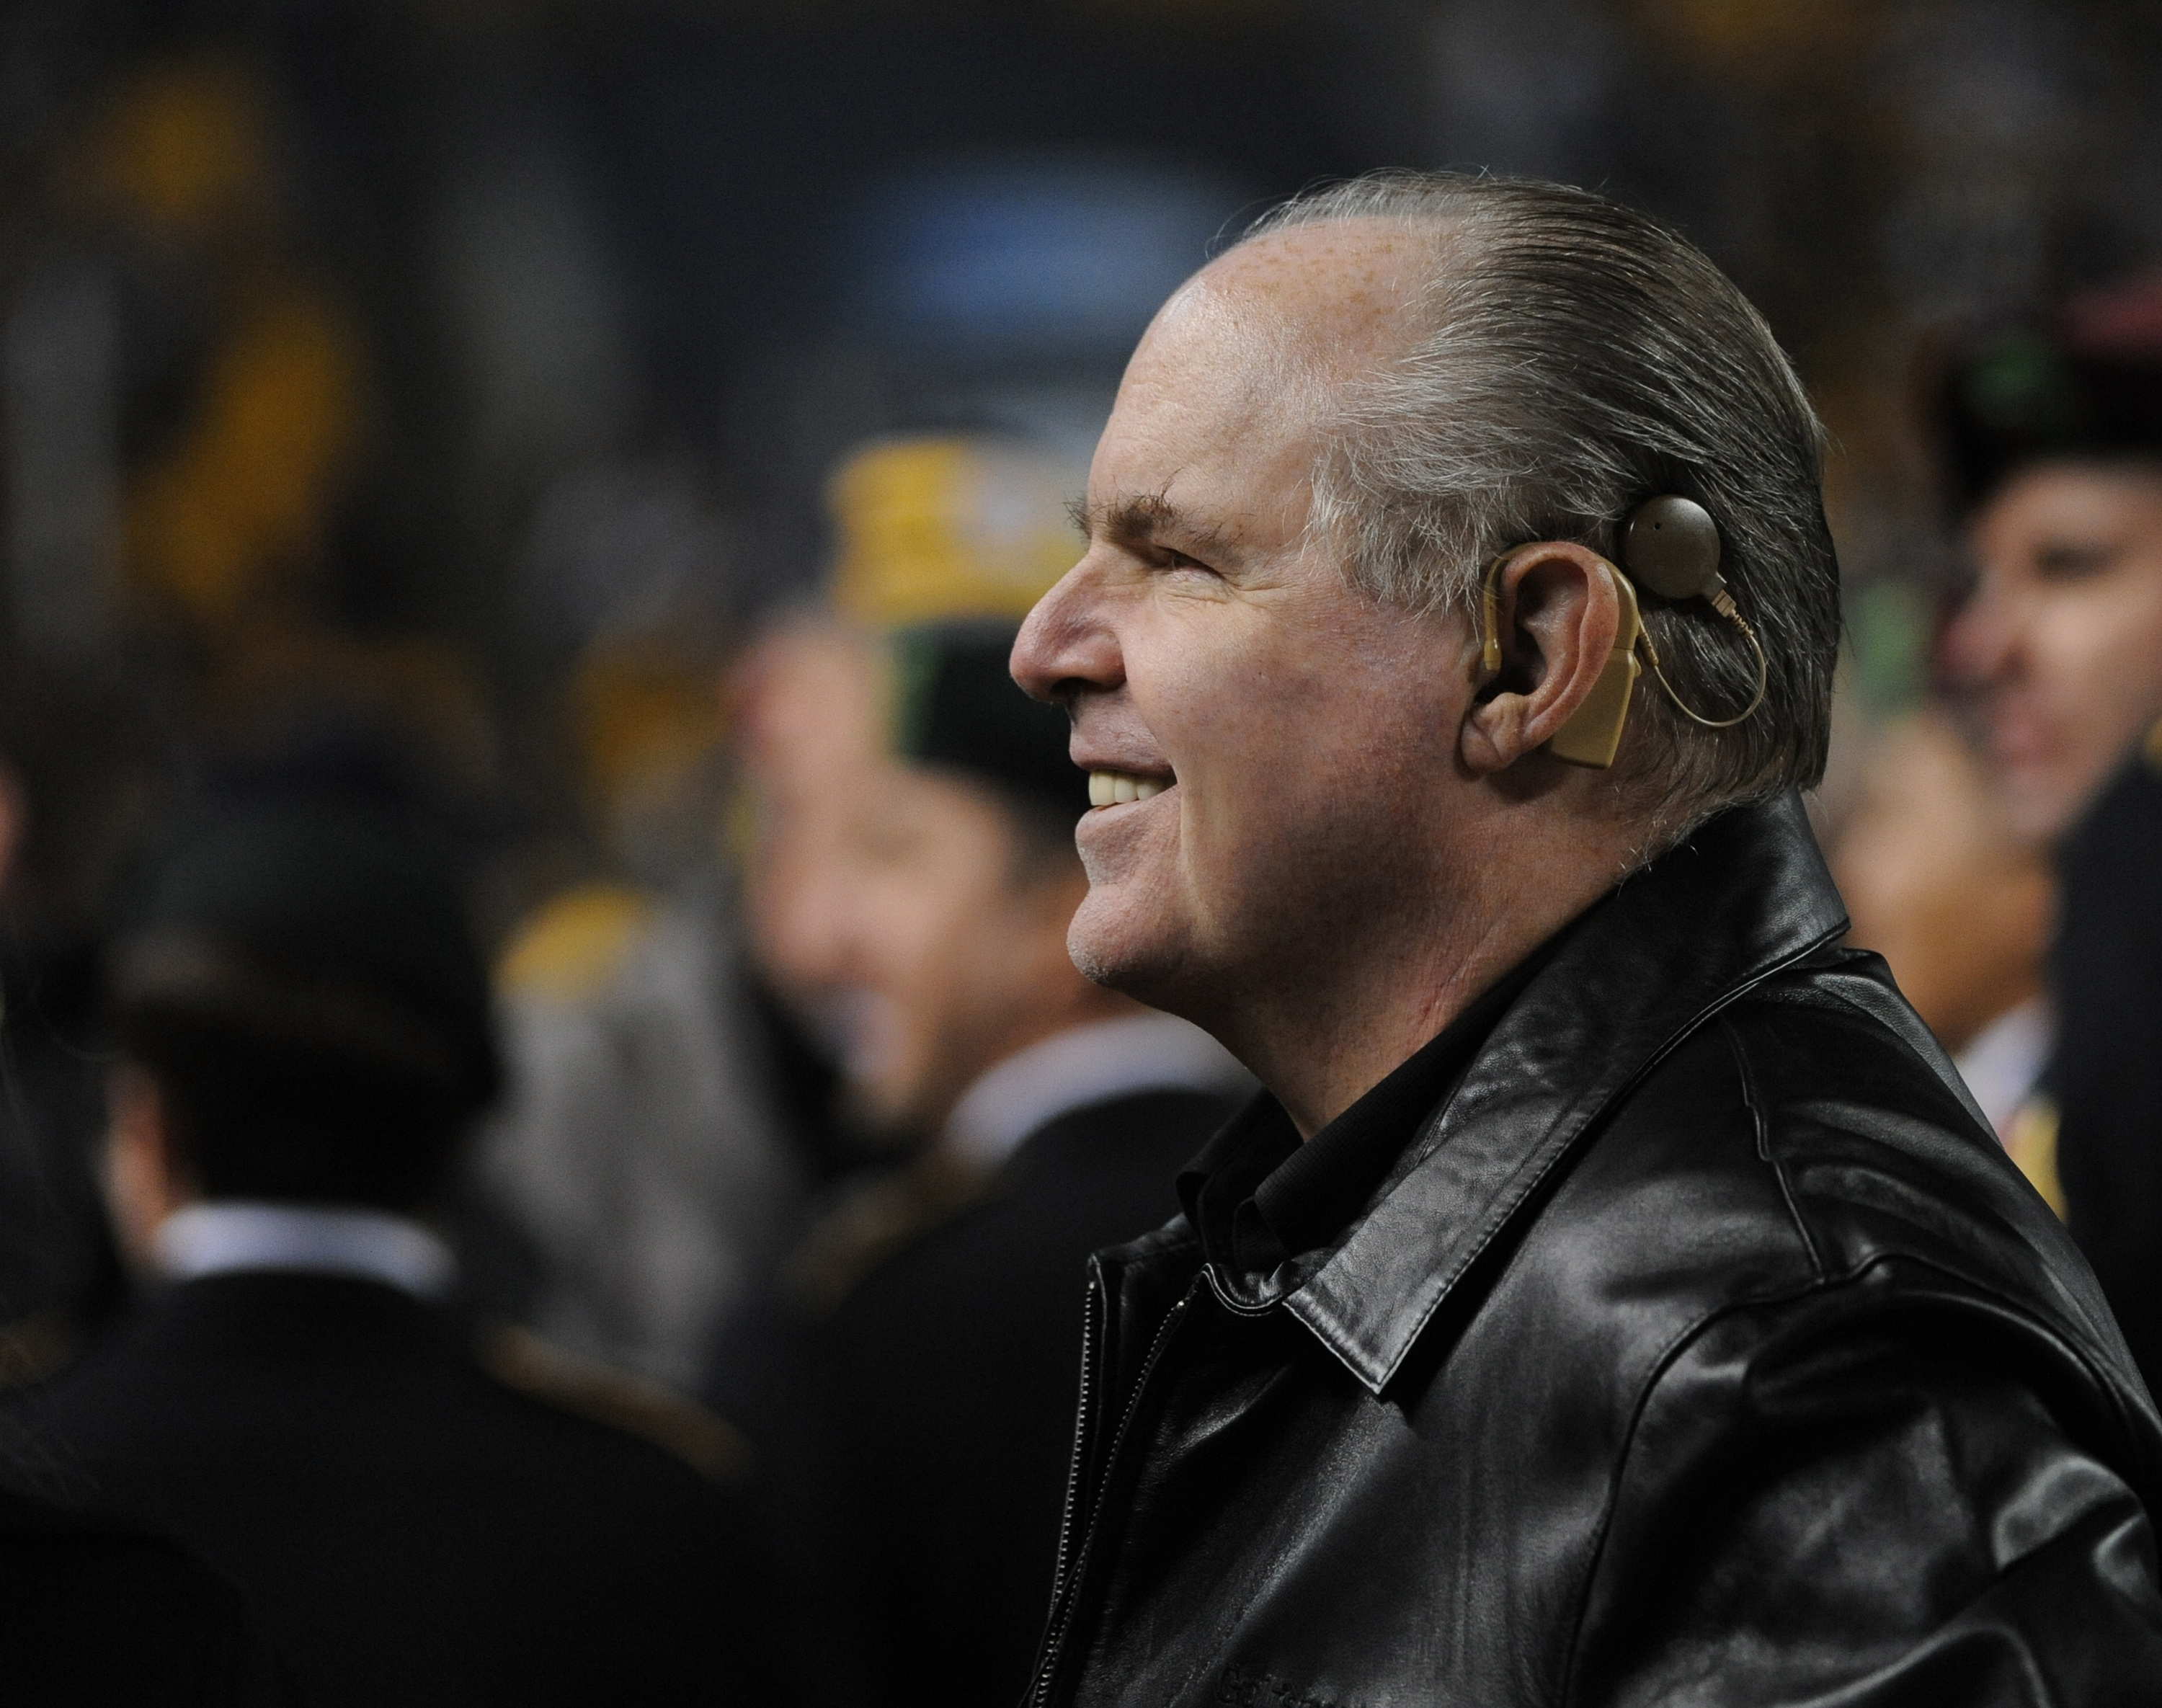 Radio talk show host and political commentator Rush Limbaugh looks on from the sideline before a National Football League game between the Baltimore Ravens and Pittsburgh Steelers at Heinz Field on November 6, 2011 in Pittsburgh, Pennsylvania. (George Gojkovich&mdash;Getty Images)